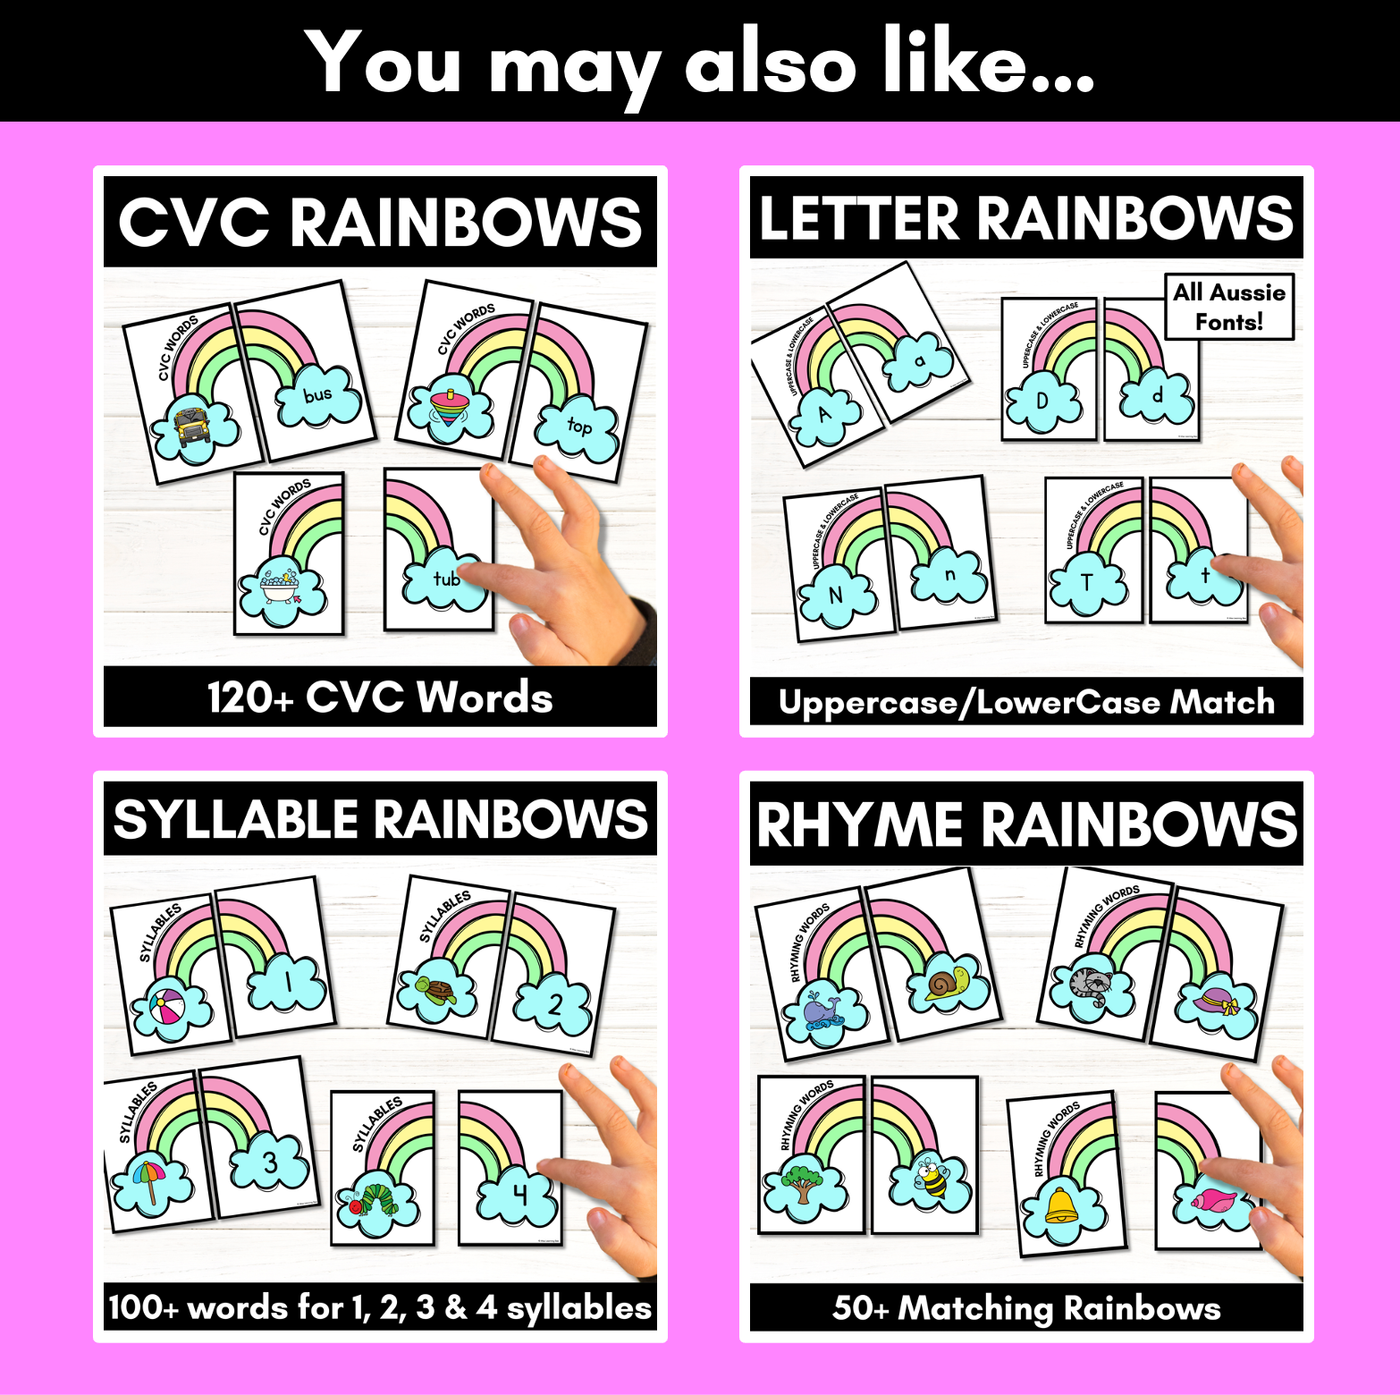 Uppercase and Lowercase Letter Matching Rainbows